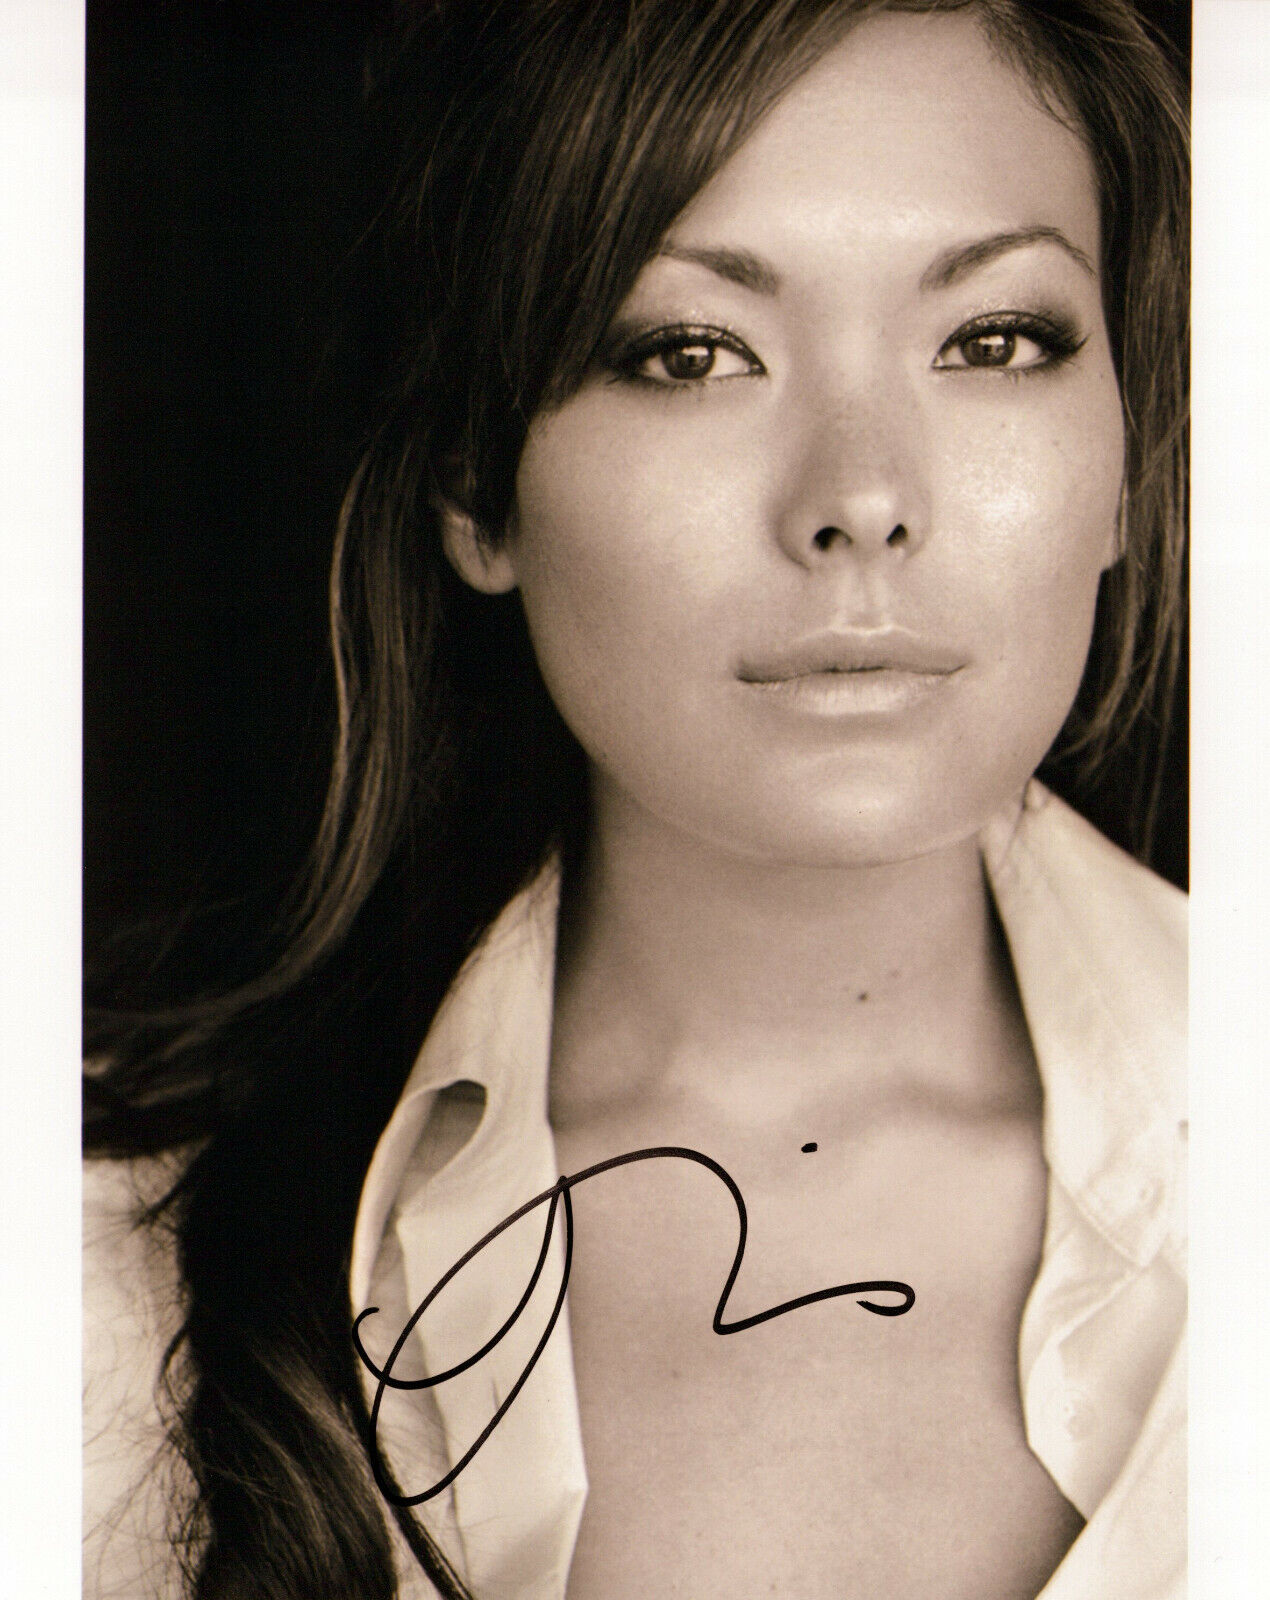 Lindsay Price glamour shot autographed Photo Poster painting signed 8x10 #3